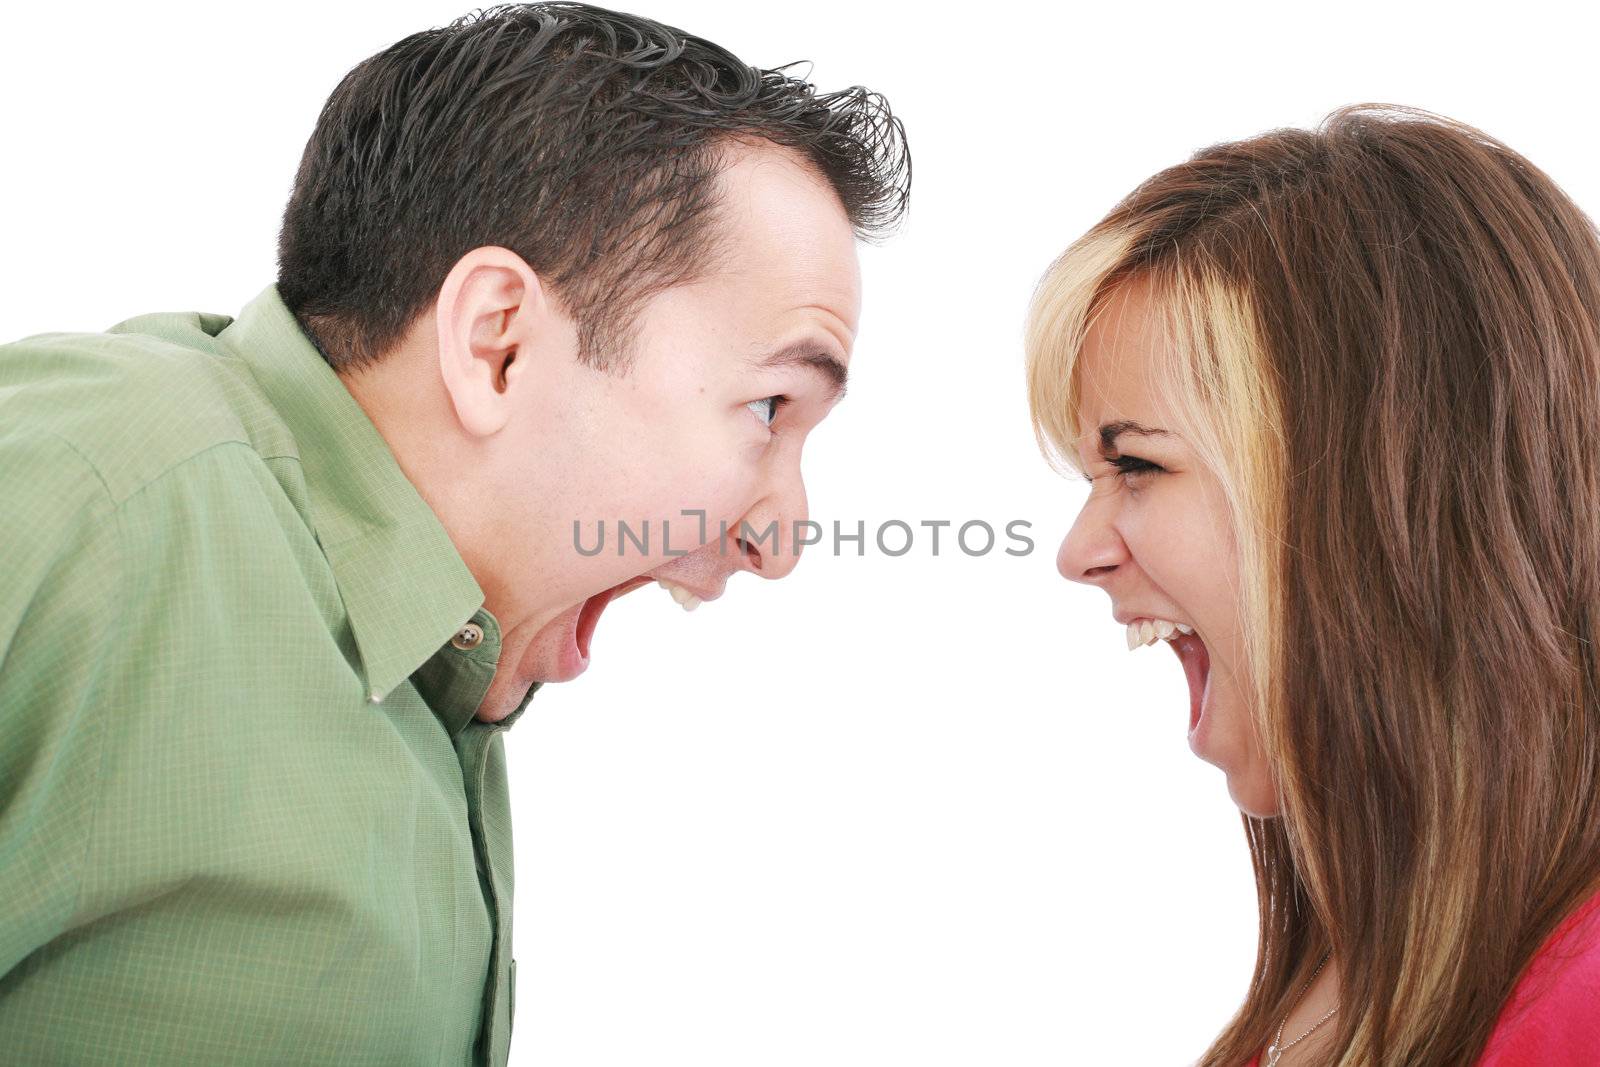 Portrait of a man and woman yelling at each other against white background